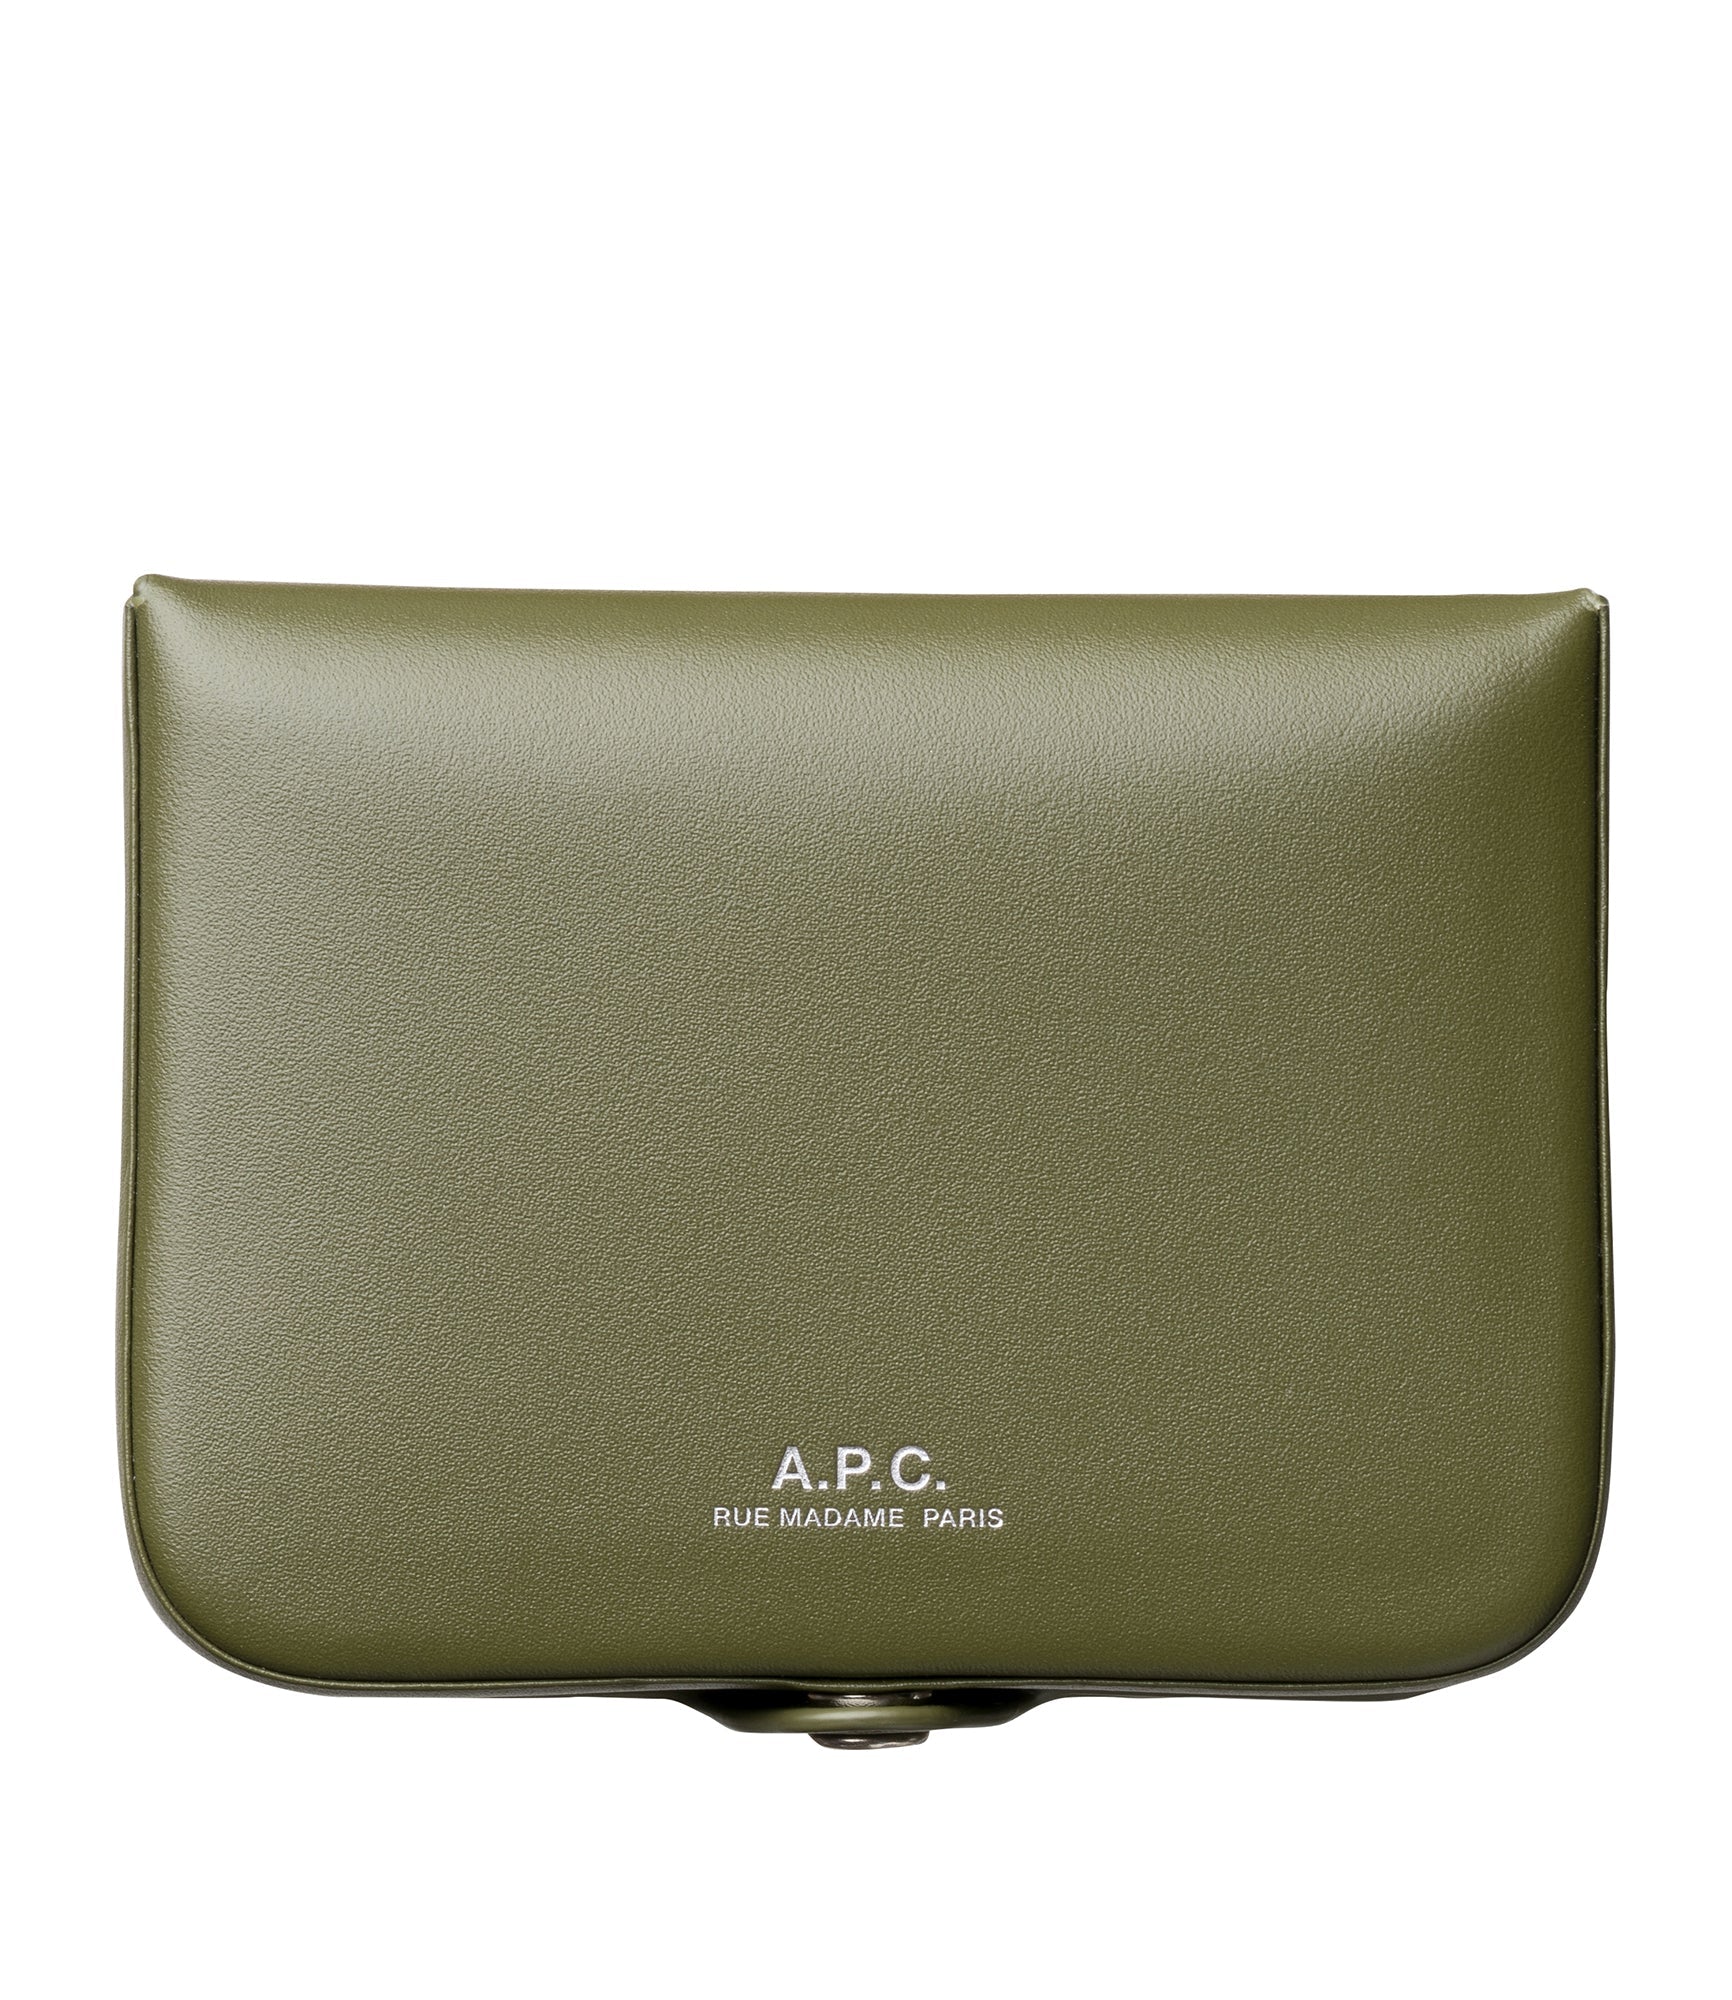 Josh coin purse | Smooth vegetable-tanned leather | A.P.C. Accessories